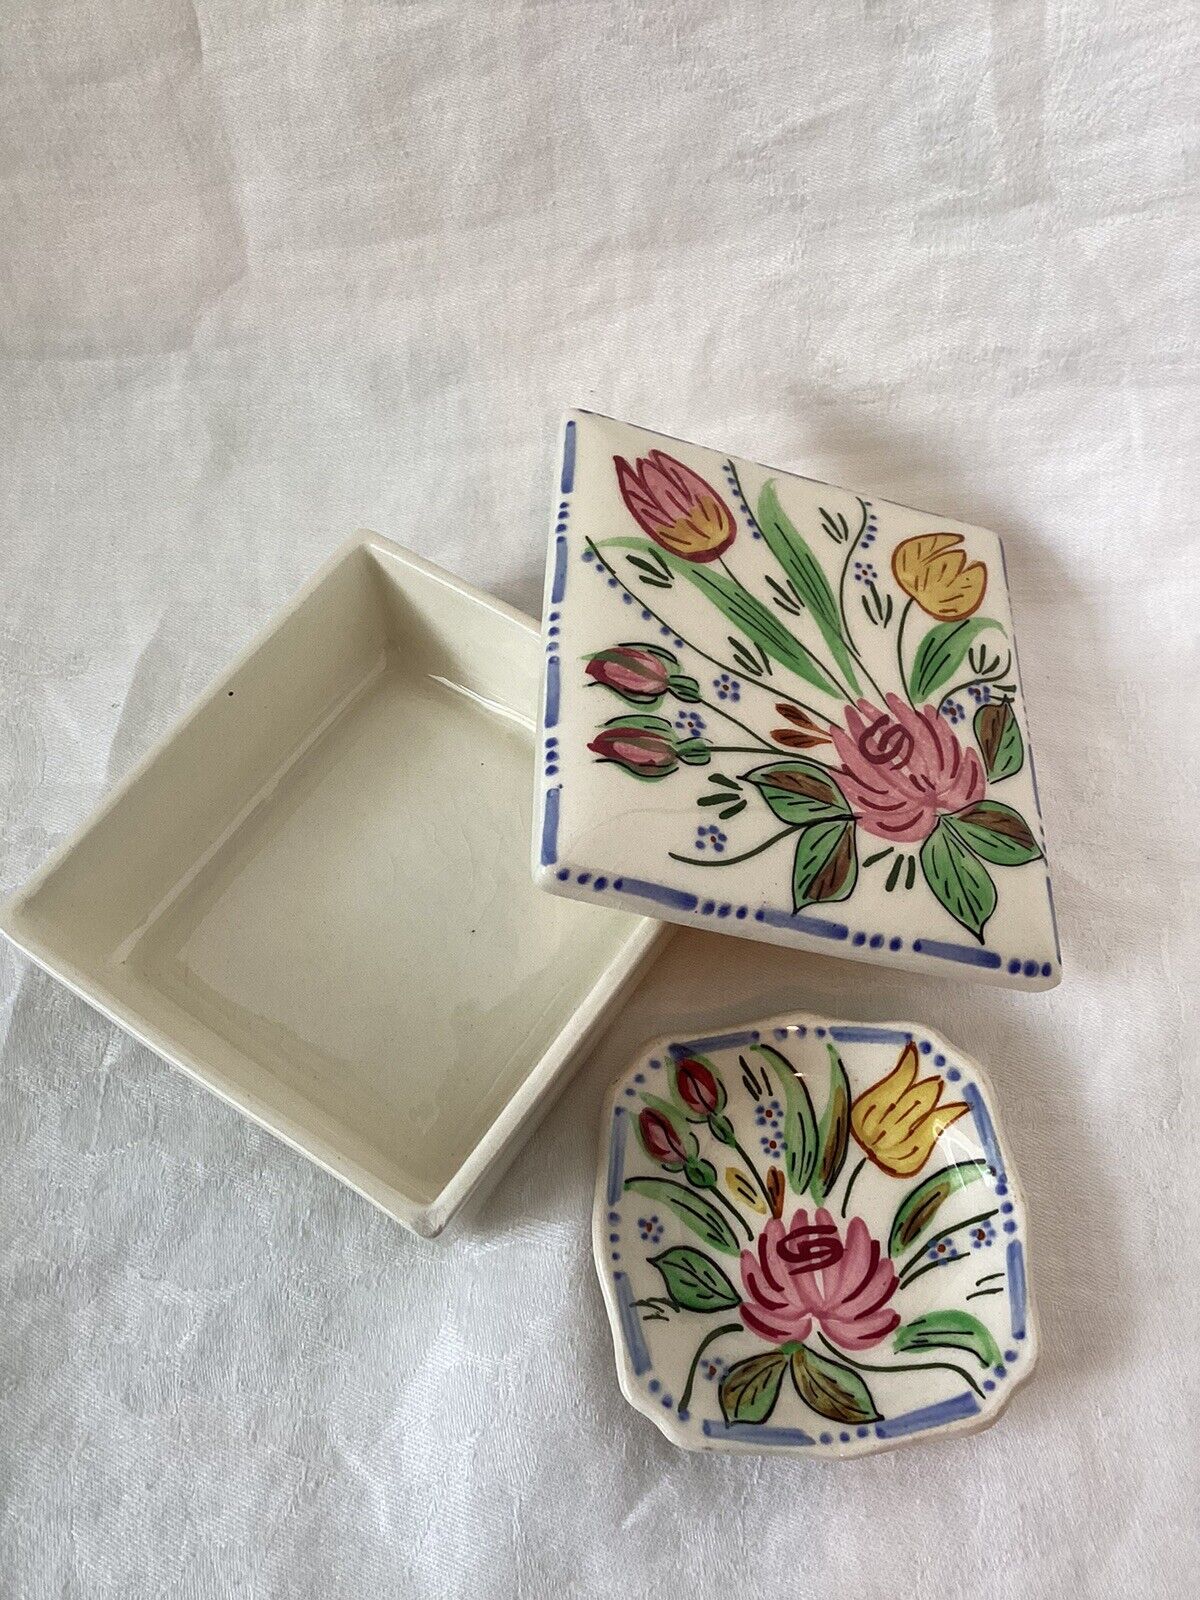 Blue Ridge Southern Pottery Cigarette Box (4X4) with Ashtray (3X3) Hand Painted